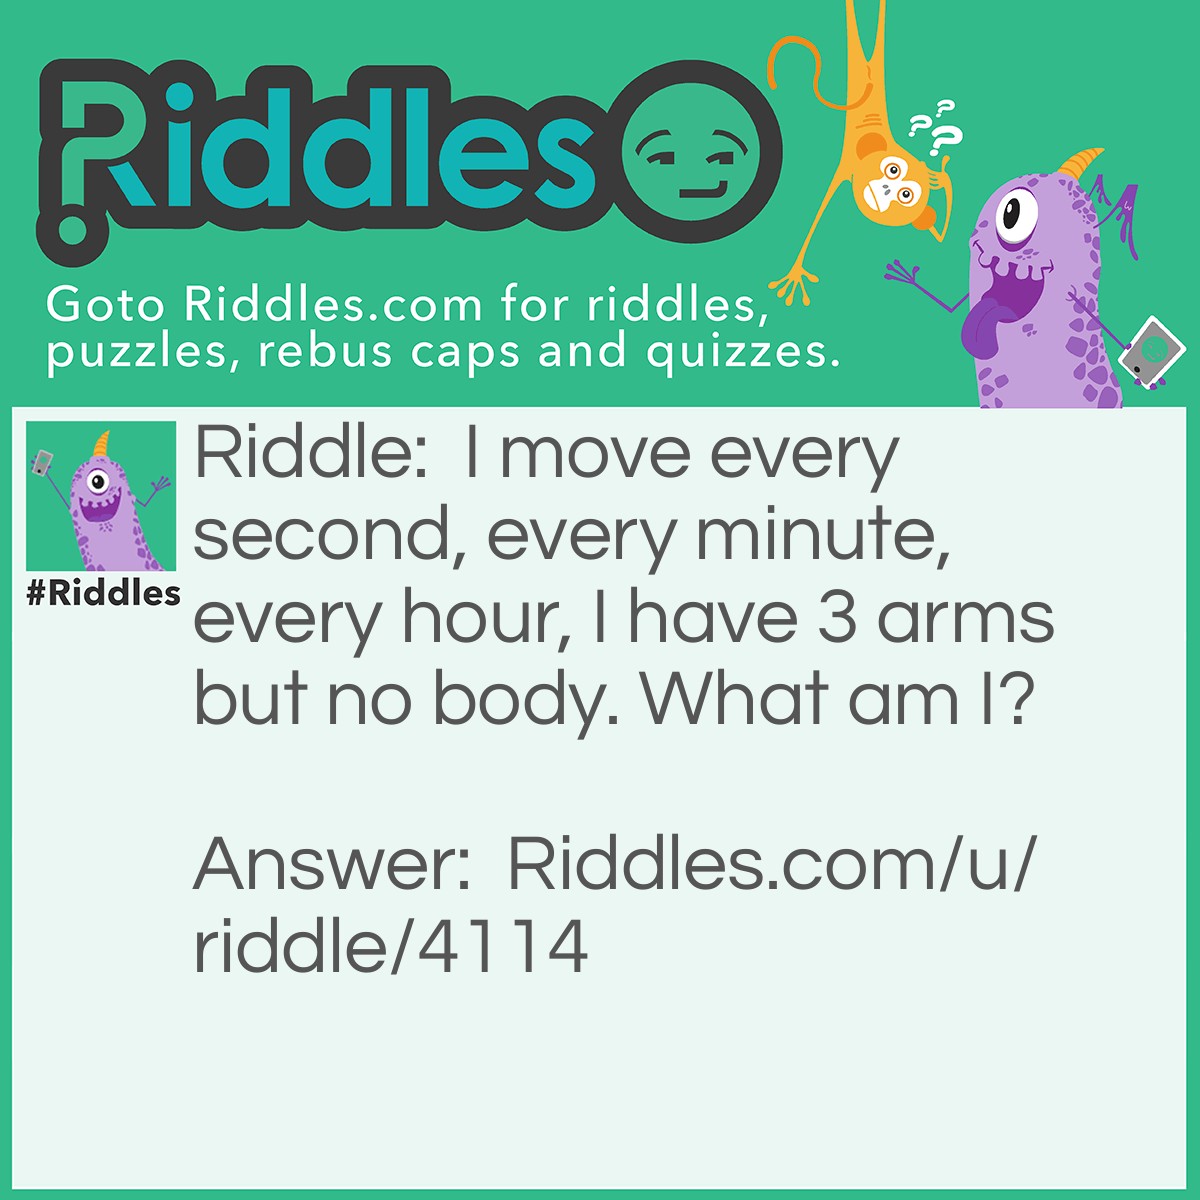 Riddle: I move every second, every minute, every hour, I have 3 arms but no body. What am I? Answer: A Clock.